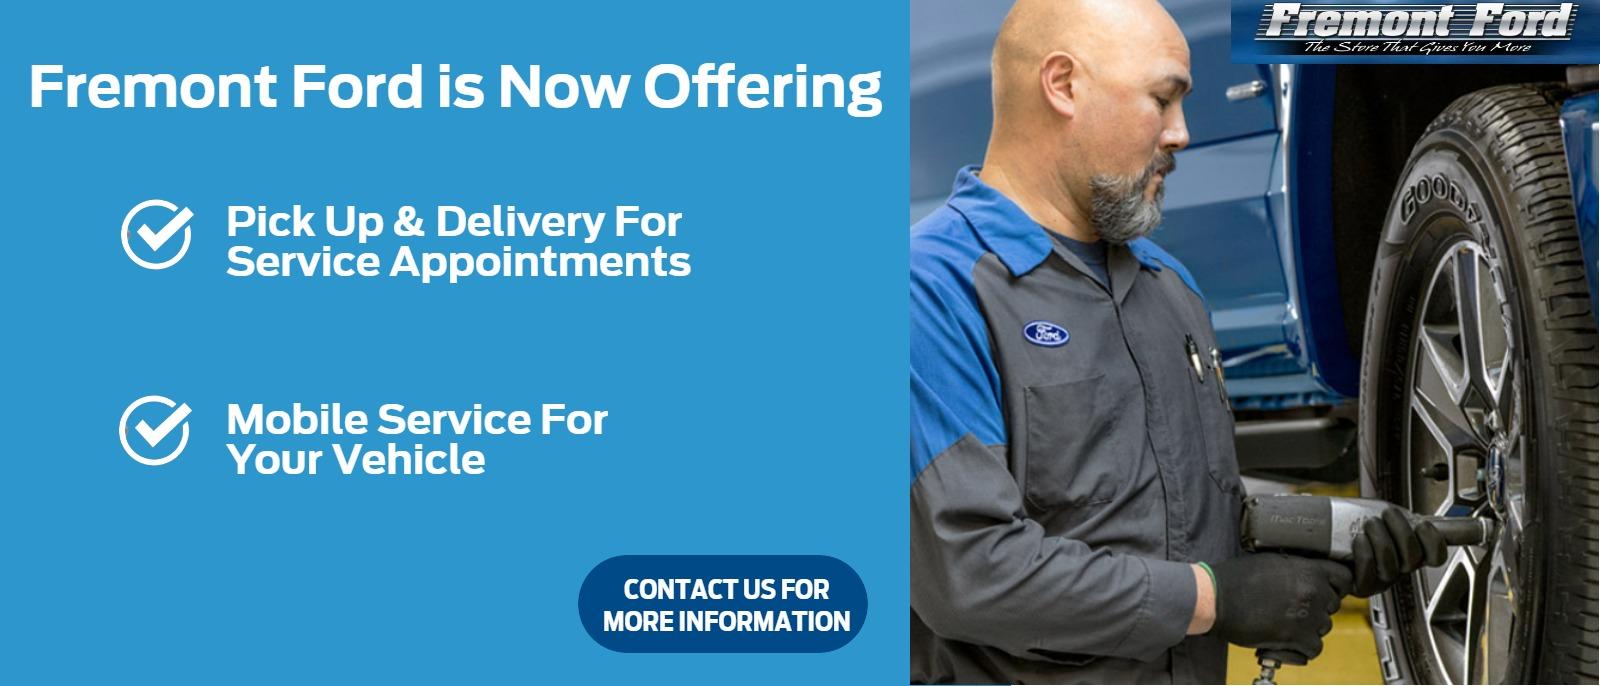 Fremont Ford Is Now Offering:

Pick Up & Delivery For Service Appointments

Mobile Service For Your Vehicle

Contact Us For More Information